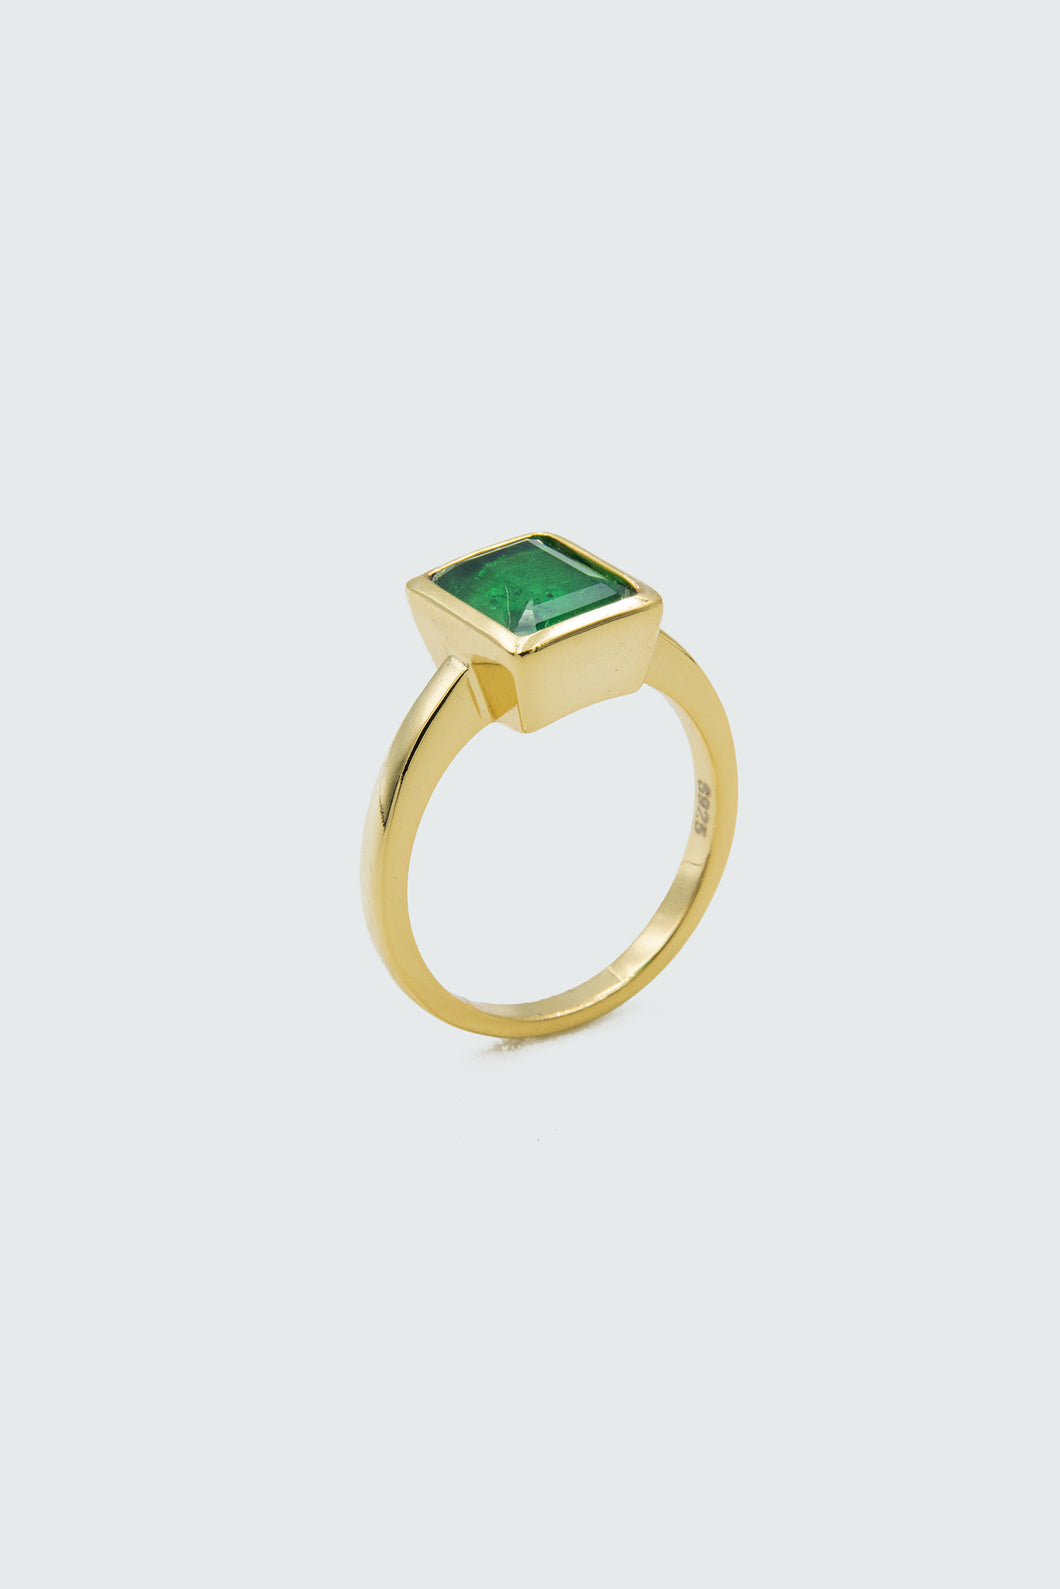 Emerald Green Stone Gold Ring